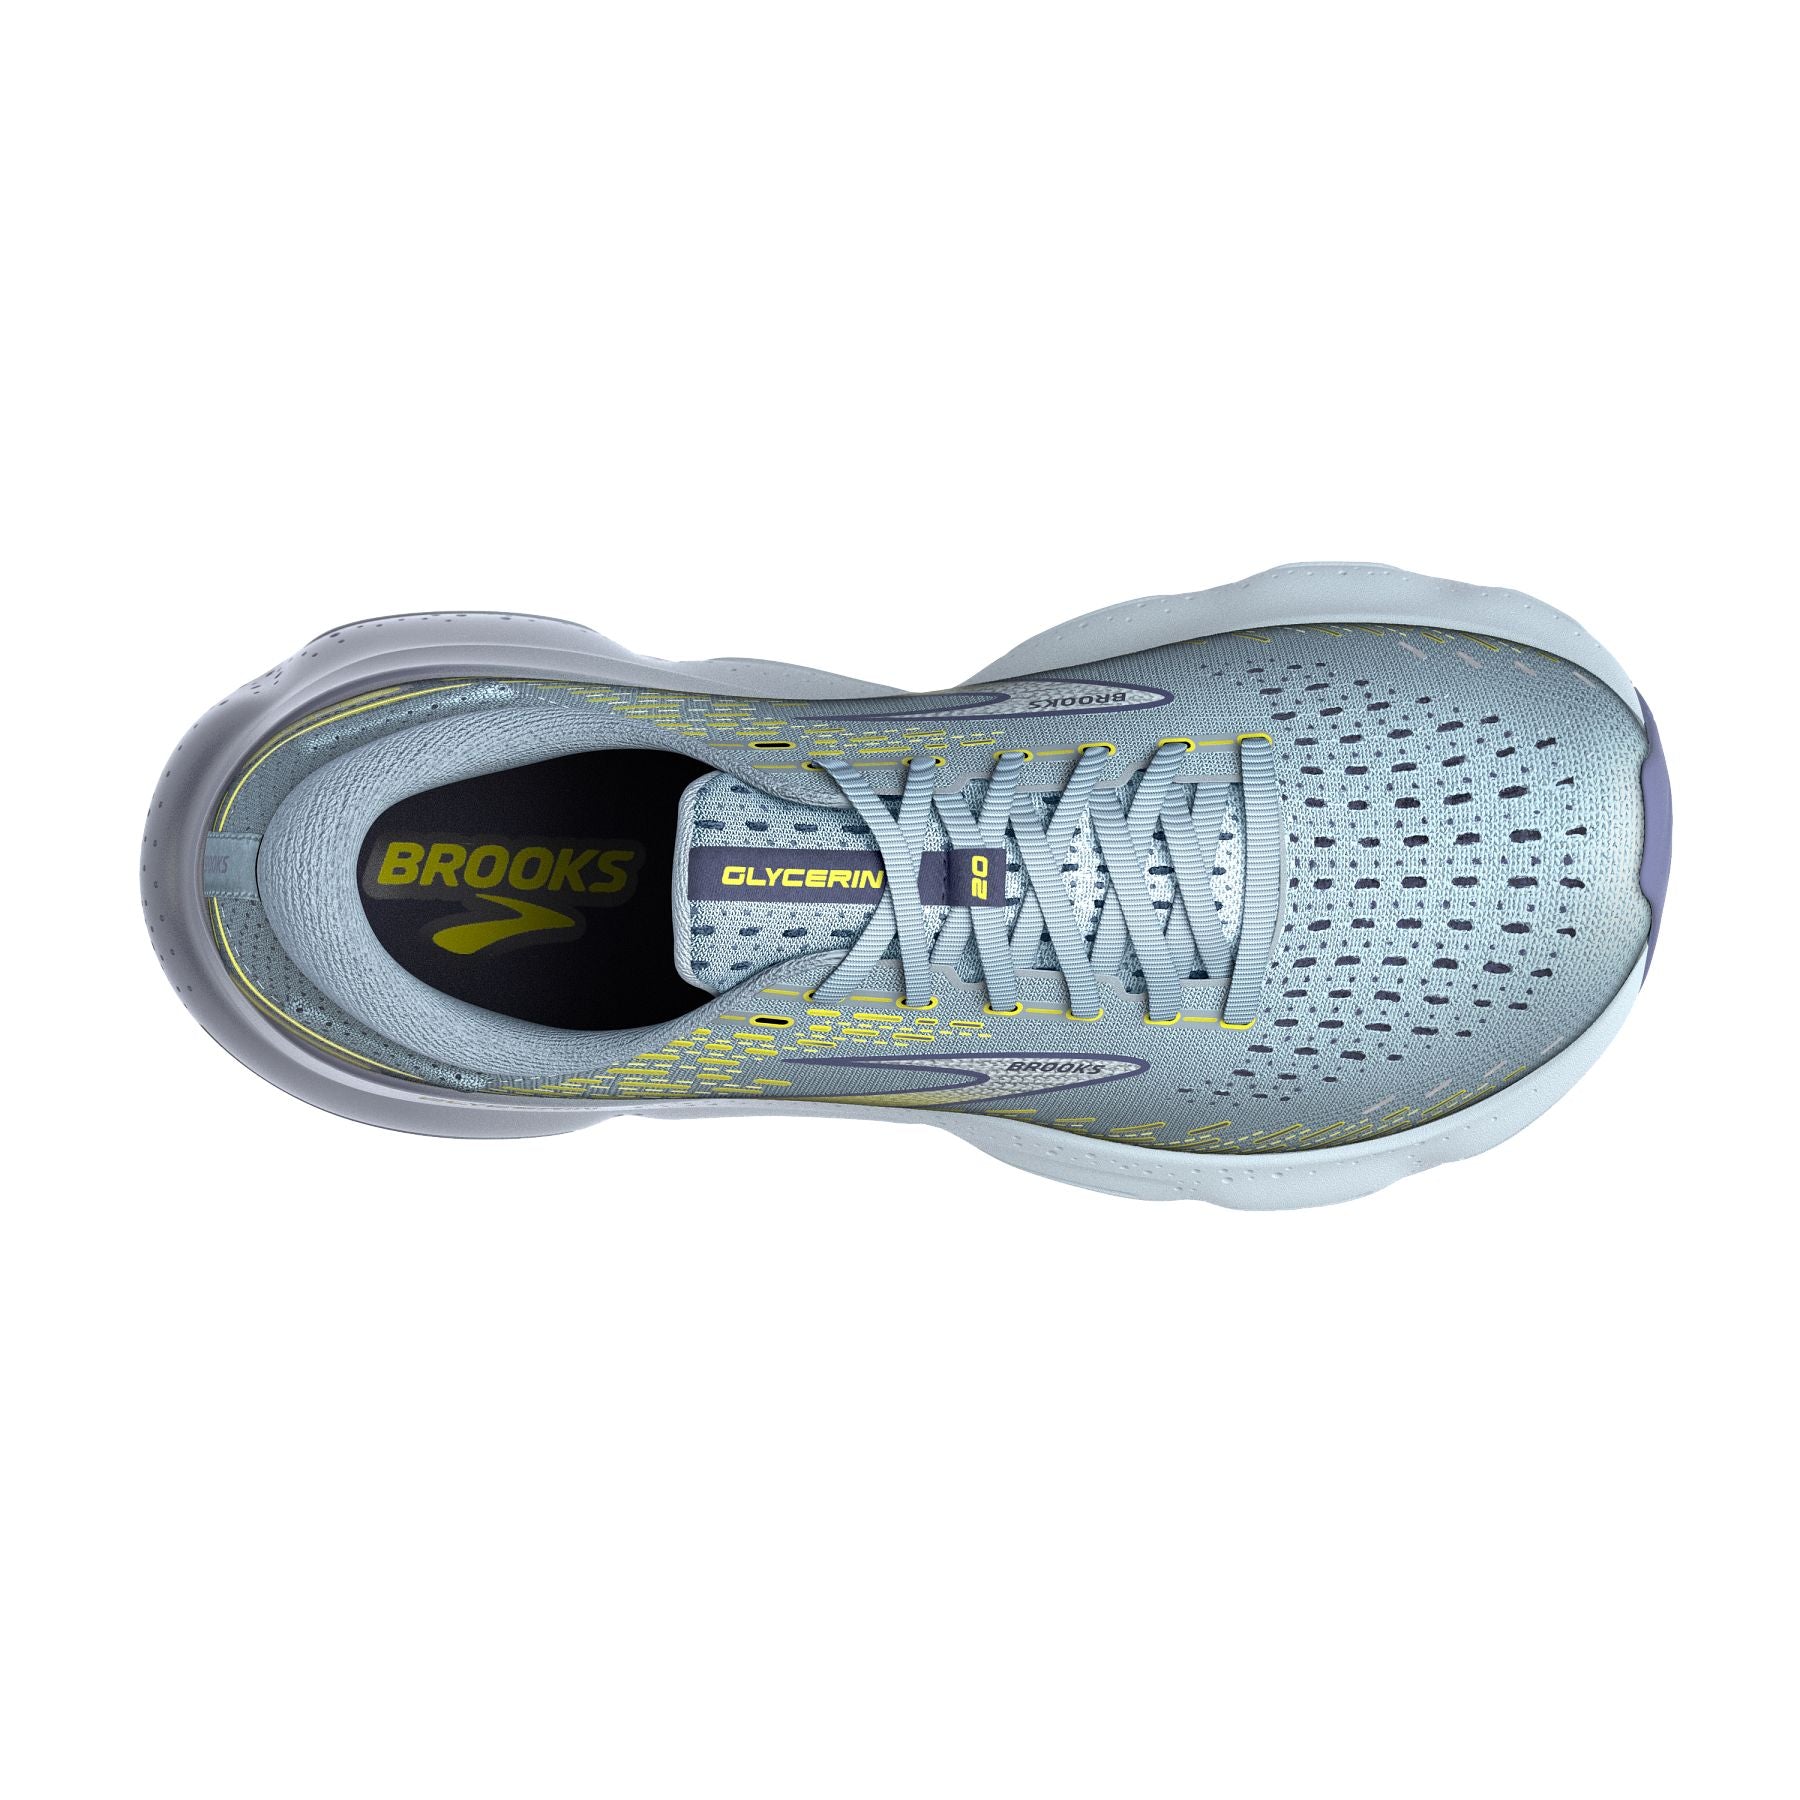 Top view of the Men's Glycerin 20 by Brook's in the color Blue/Crown Blue/Sulphur